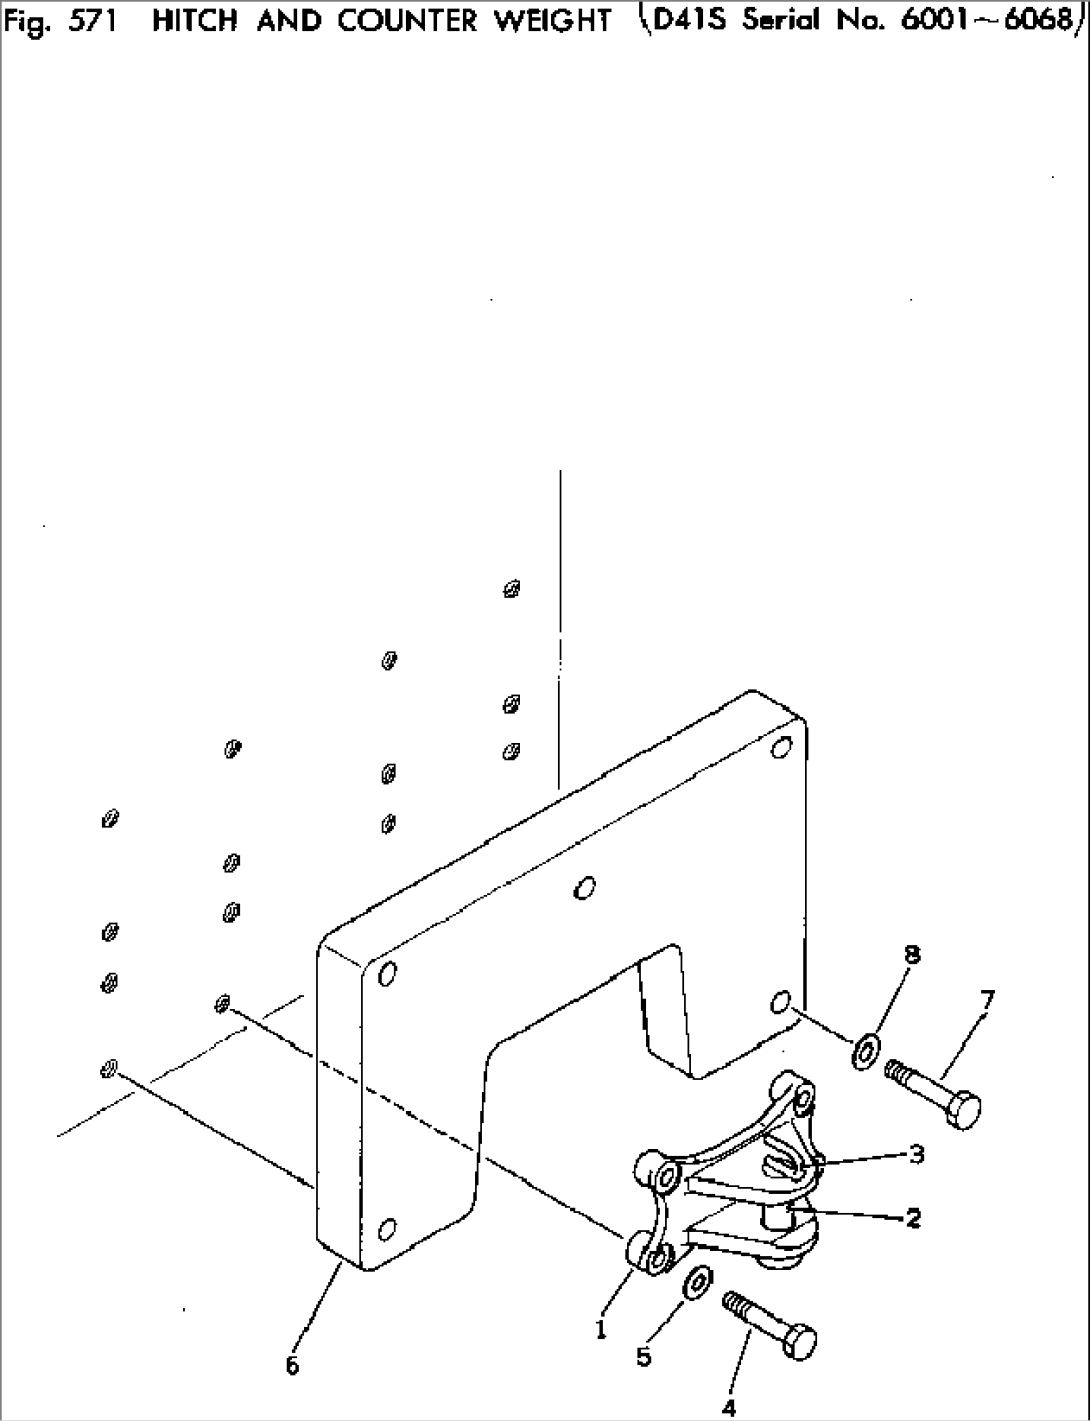 HITCH AND COUNTER WEIGHT(#6001-6068)